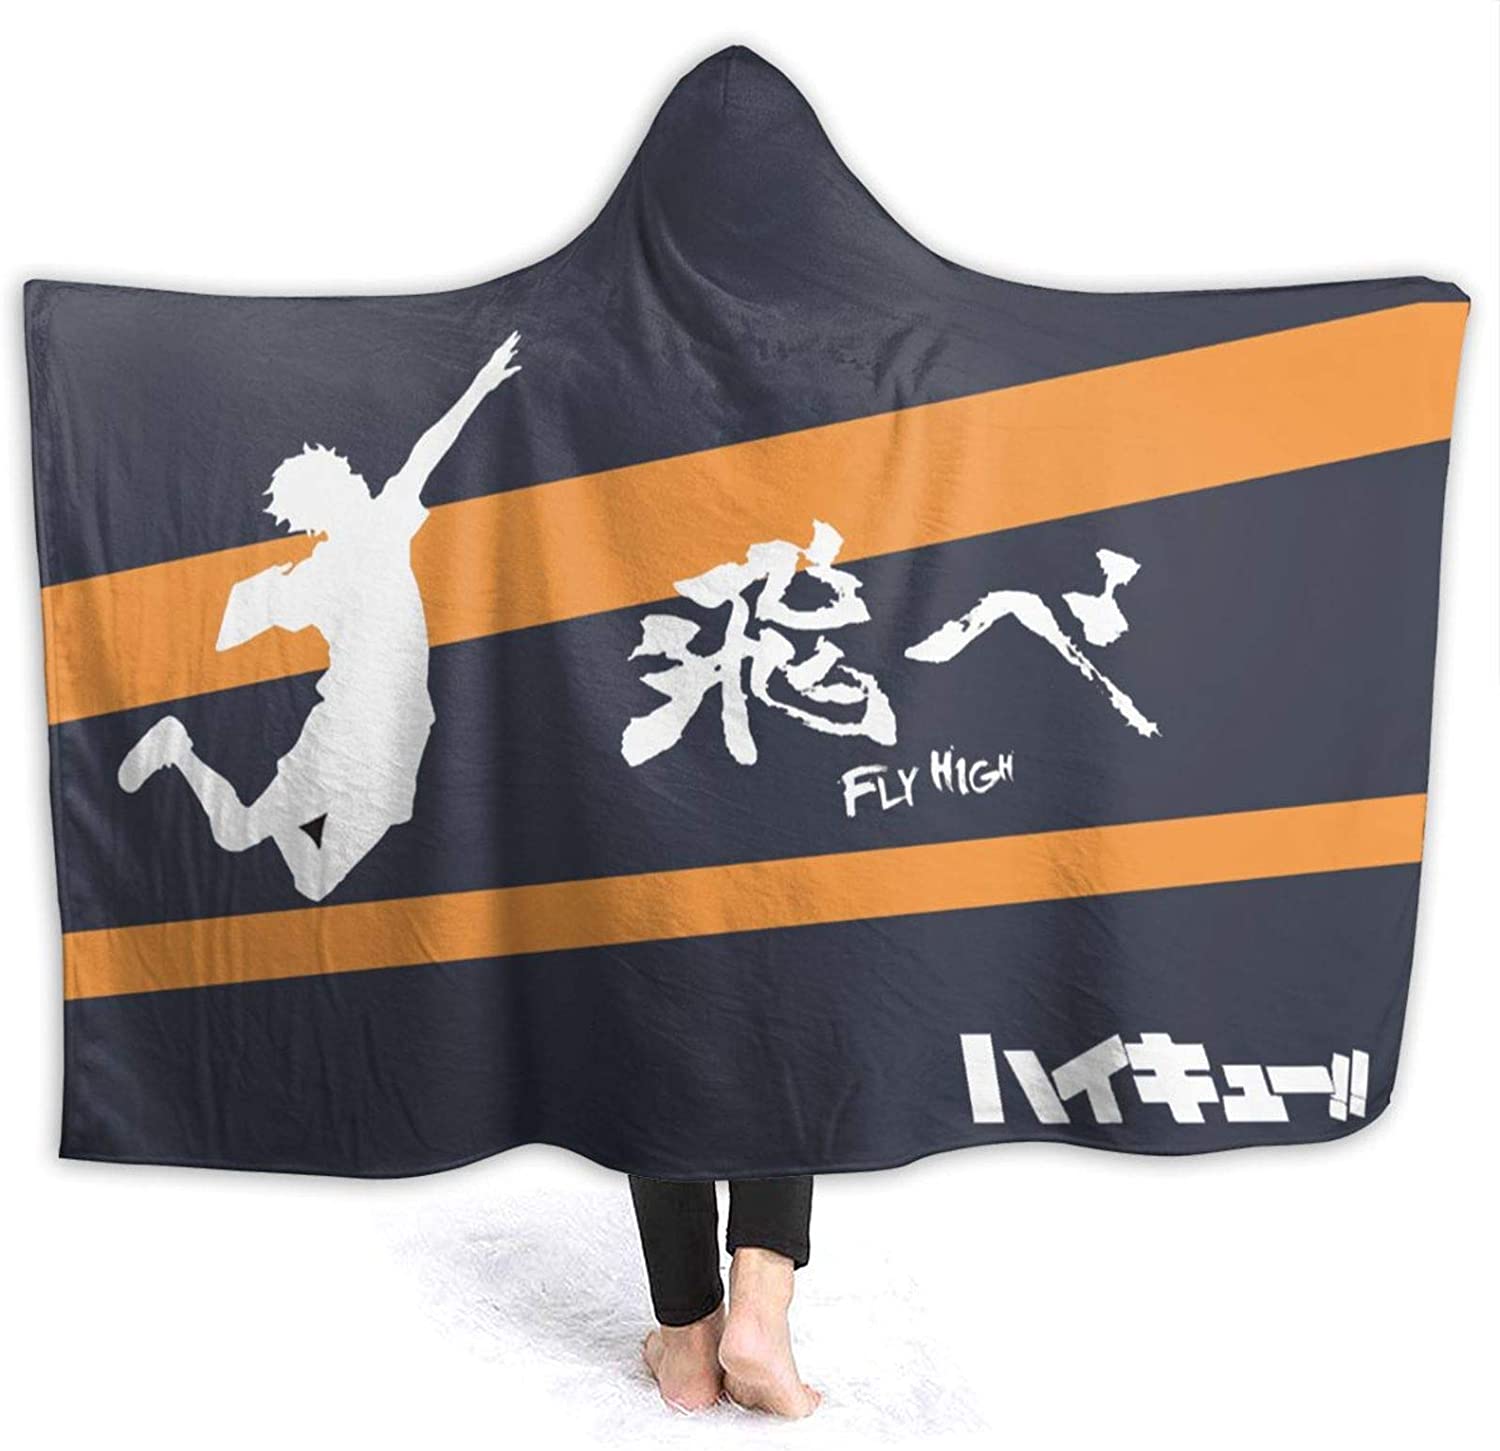 Anti-Pilling Flannel Hooded Blanket - Anime Haikyu! Passionate Volleyball Blankets